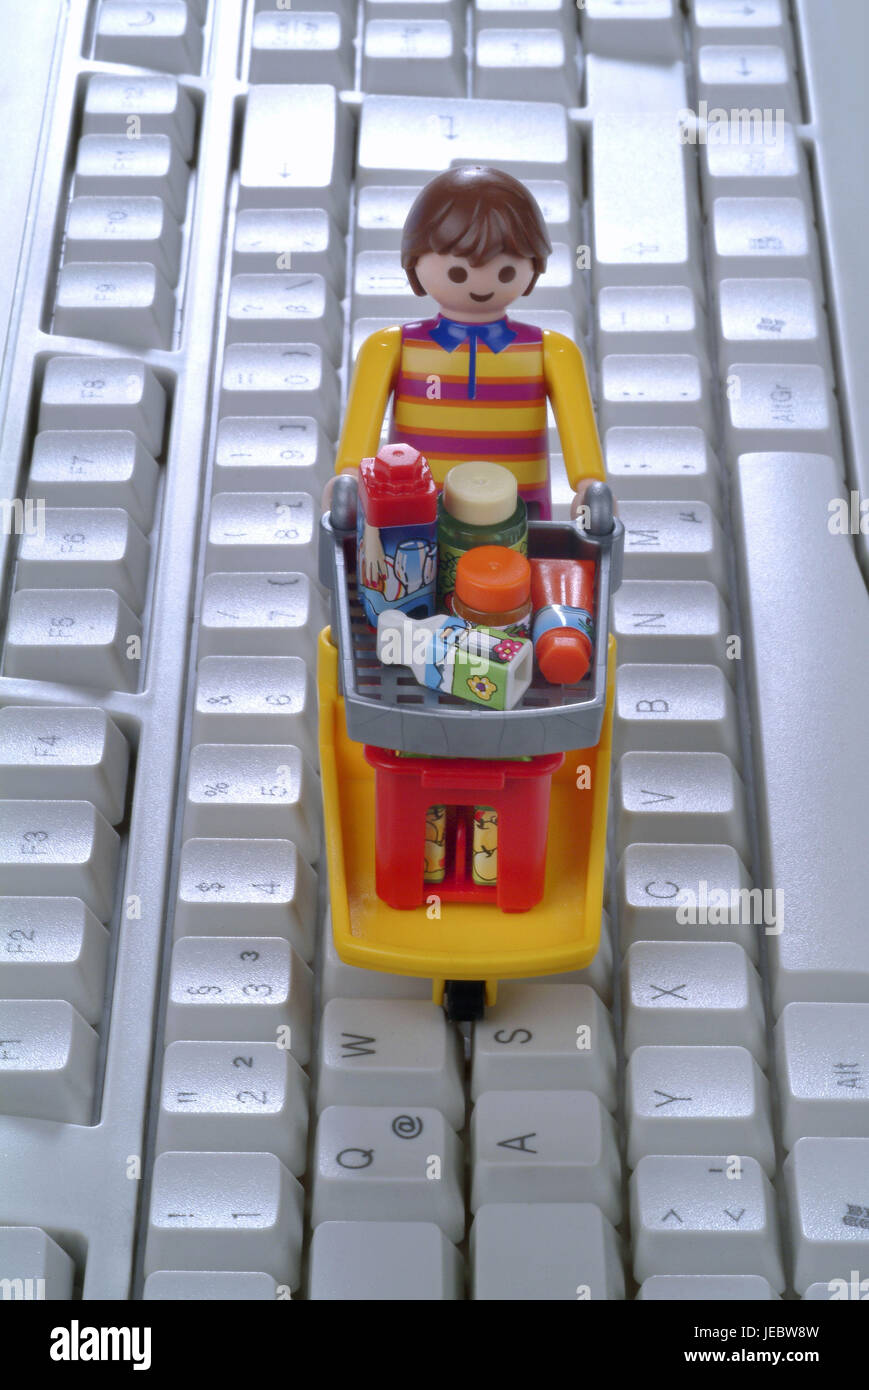 Character by shopping cart on computer keyboard, Stock Photo